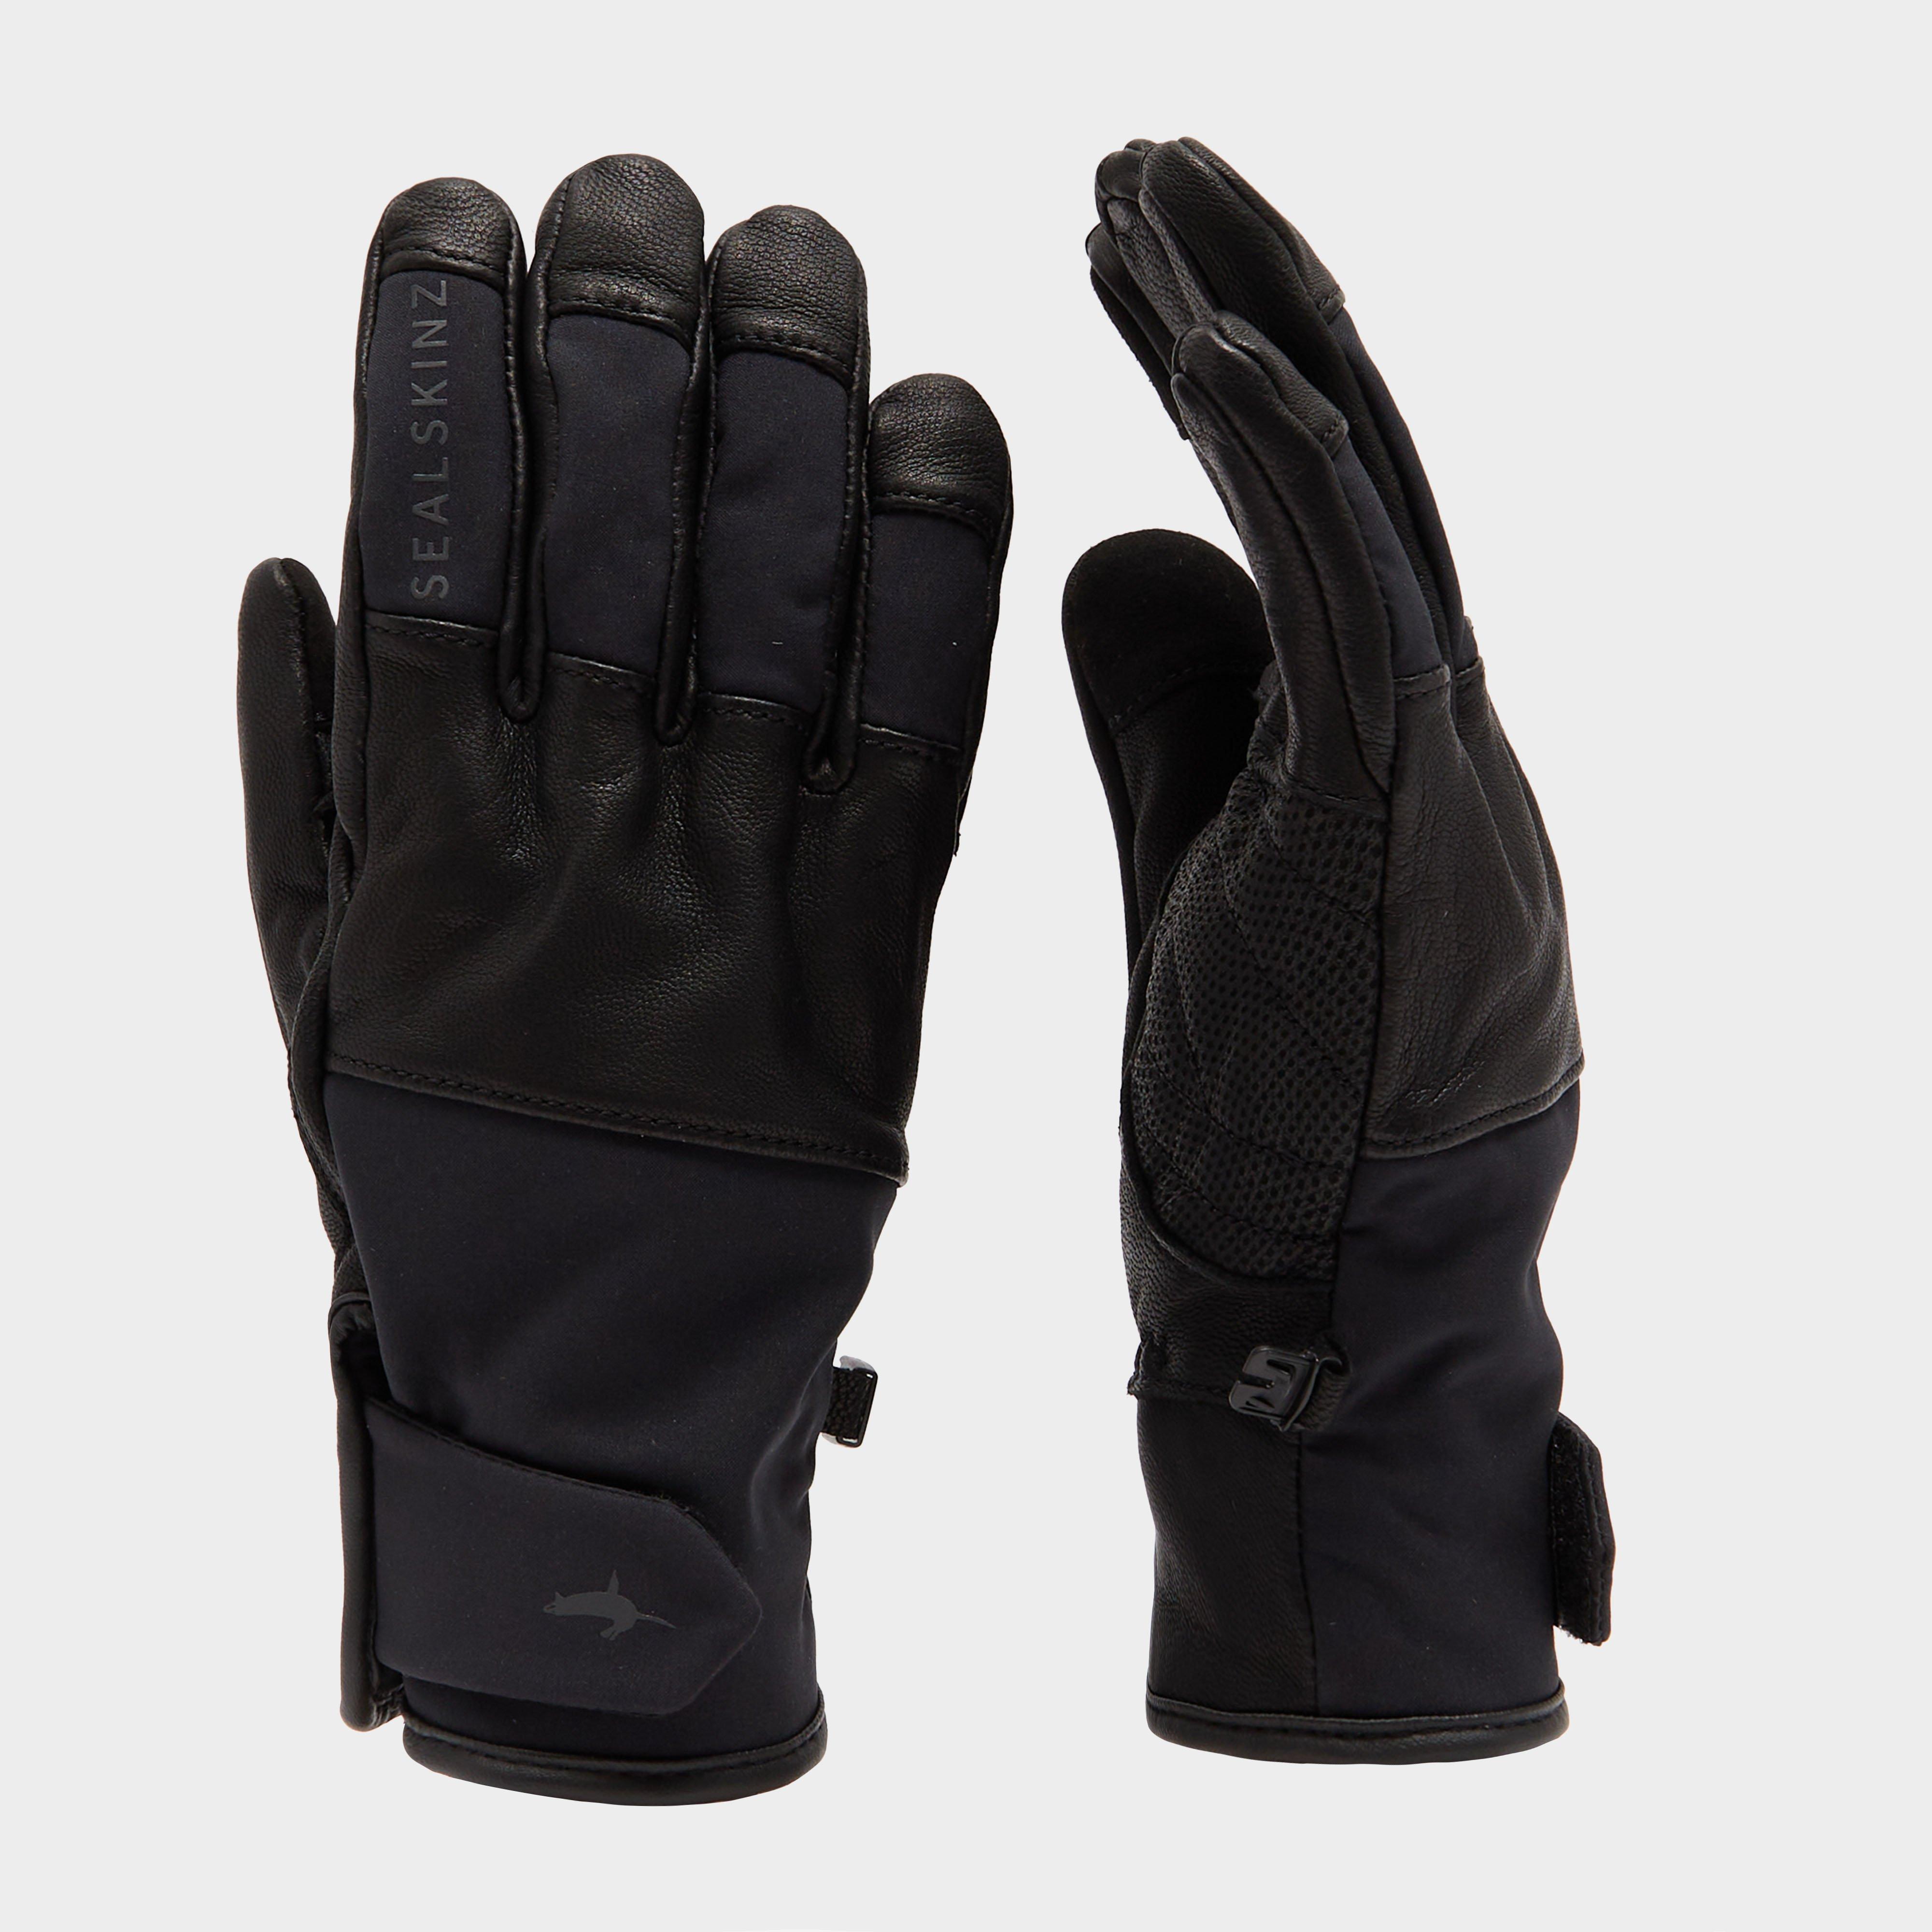 Waterproof Cold Weather Glove With Fusion Control - Black